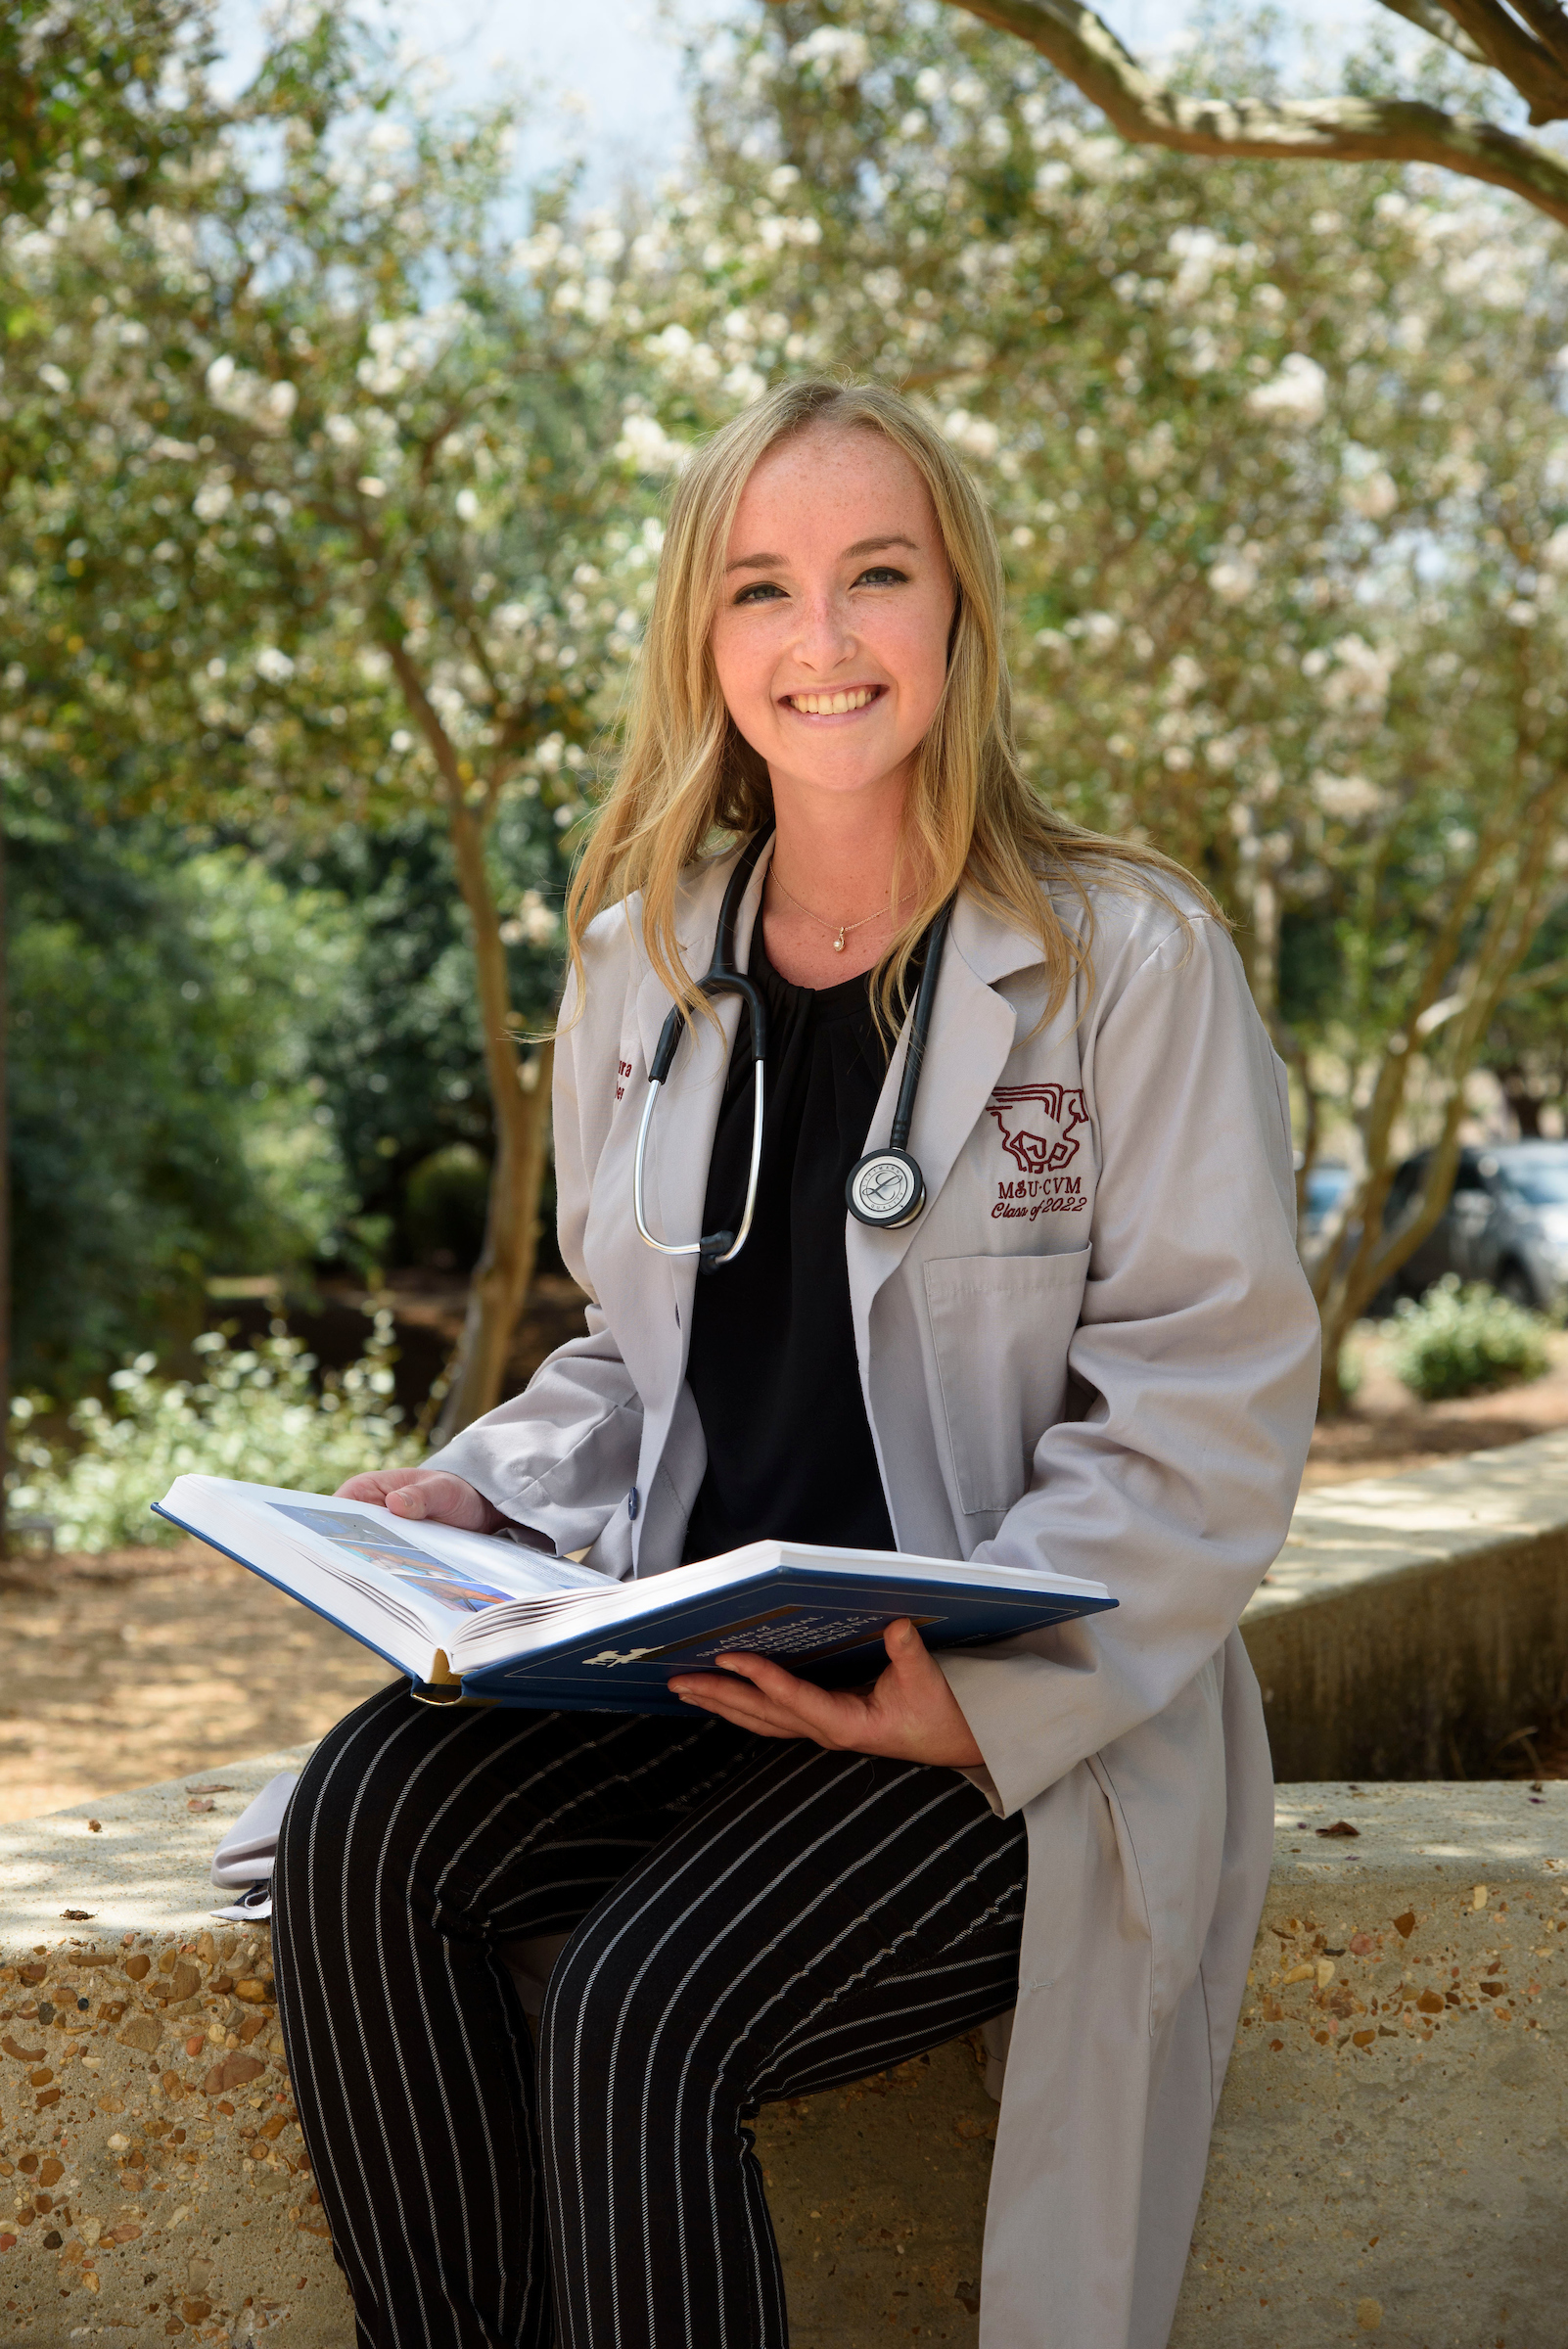 A veterinary student studies outside 